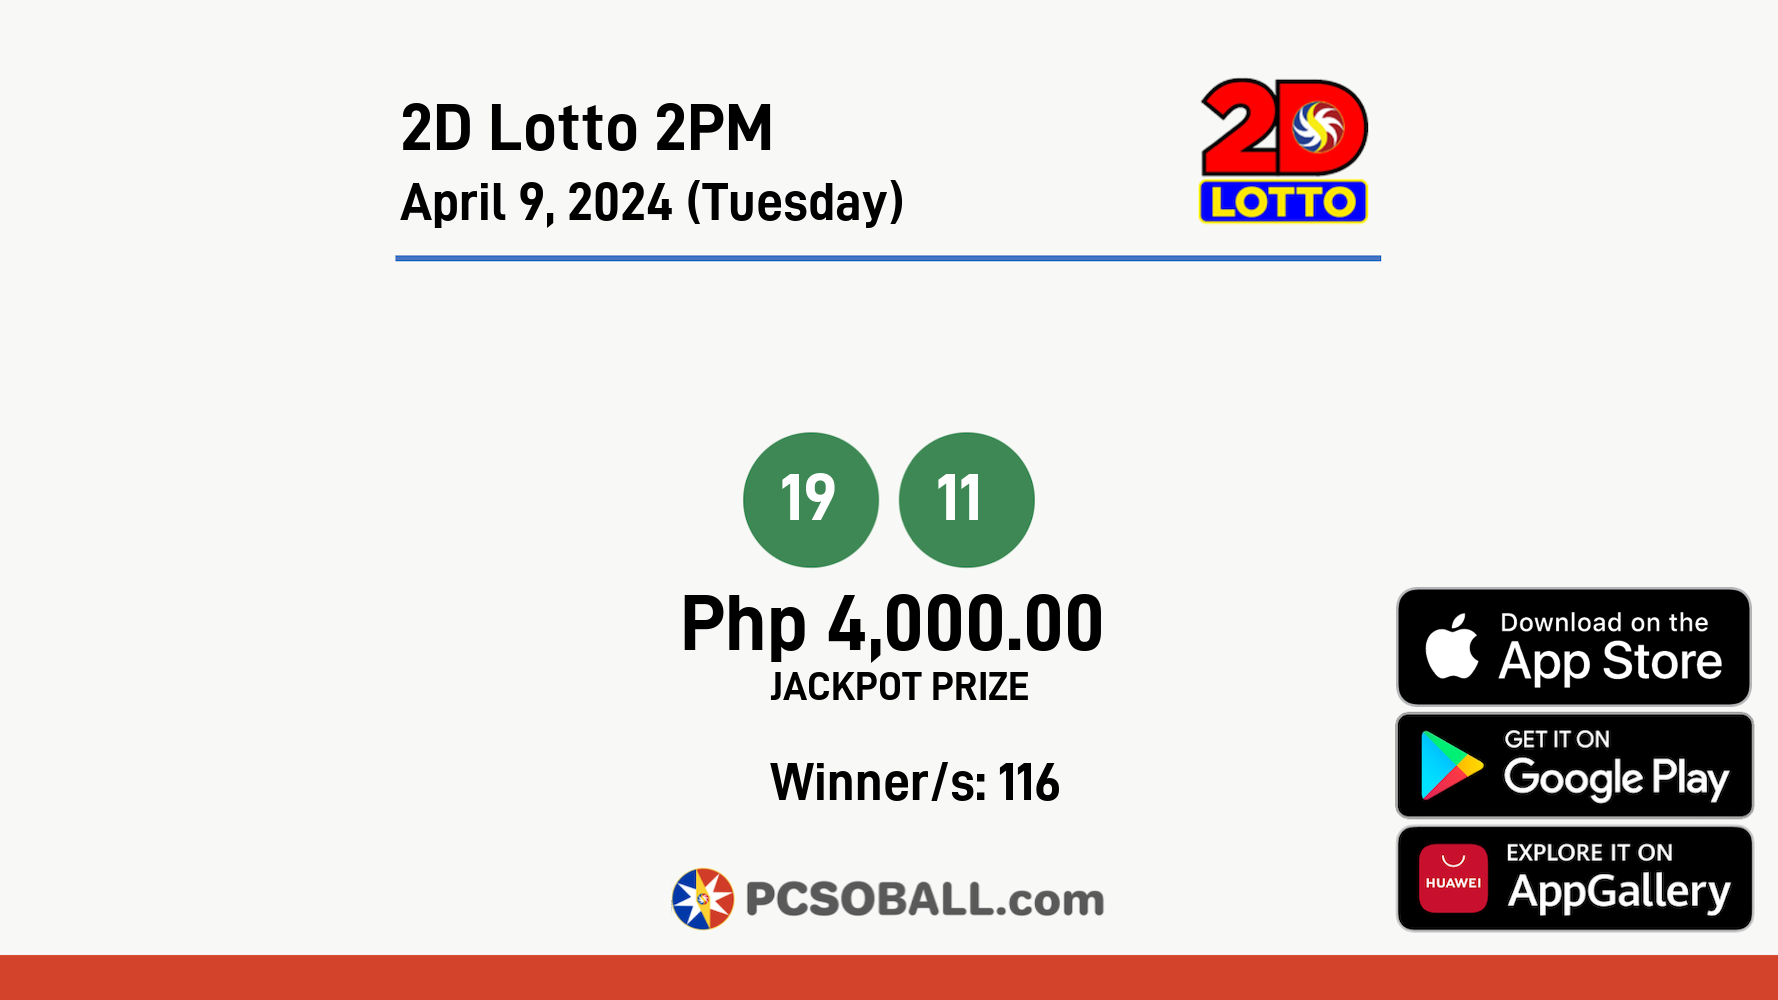 2D Lotto 2PM April 9, 2024 (Tuesday) Result